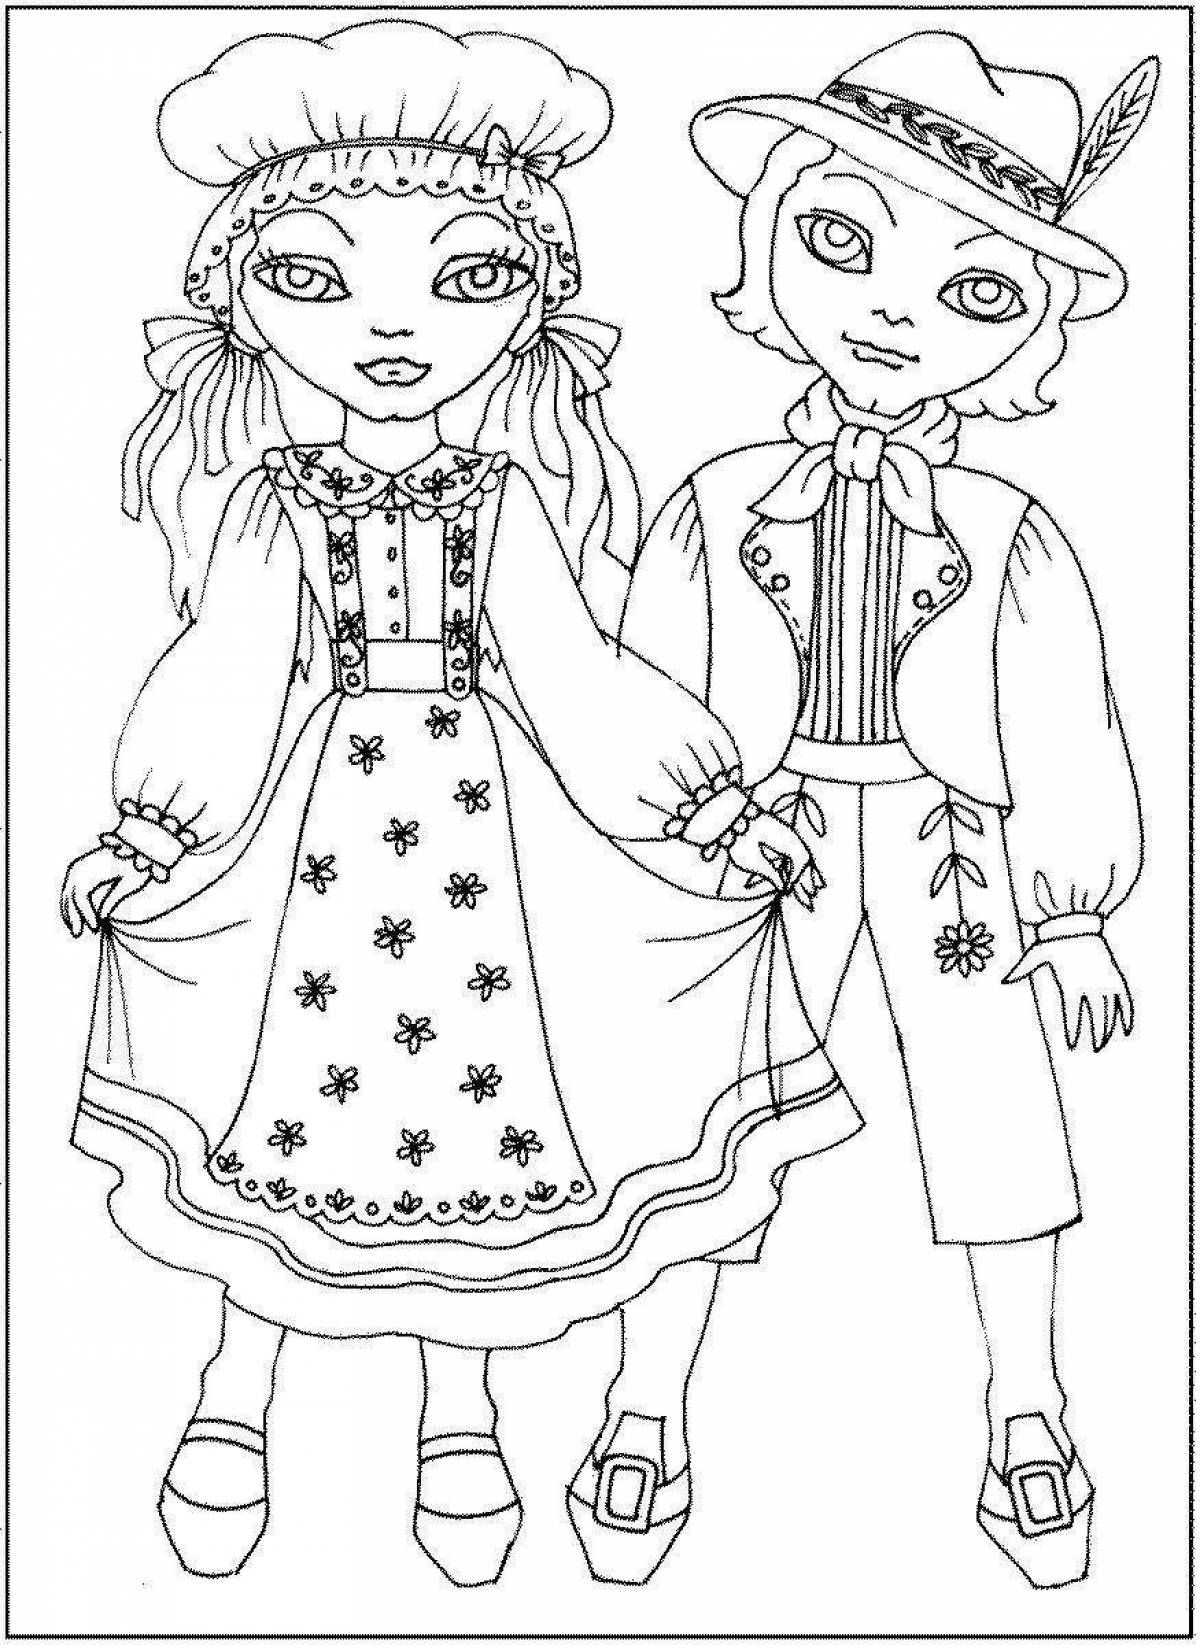 Coloring page stylish folk costume for children